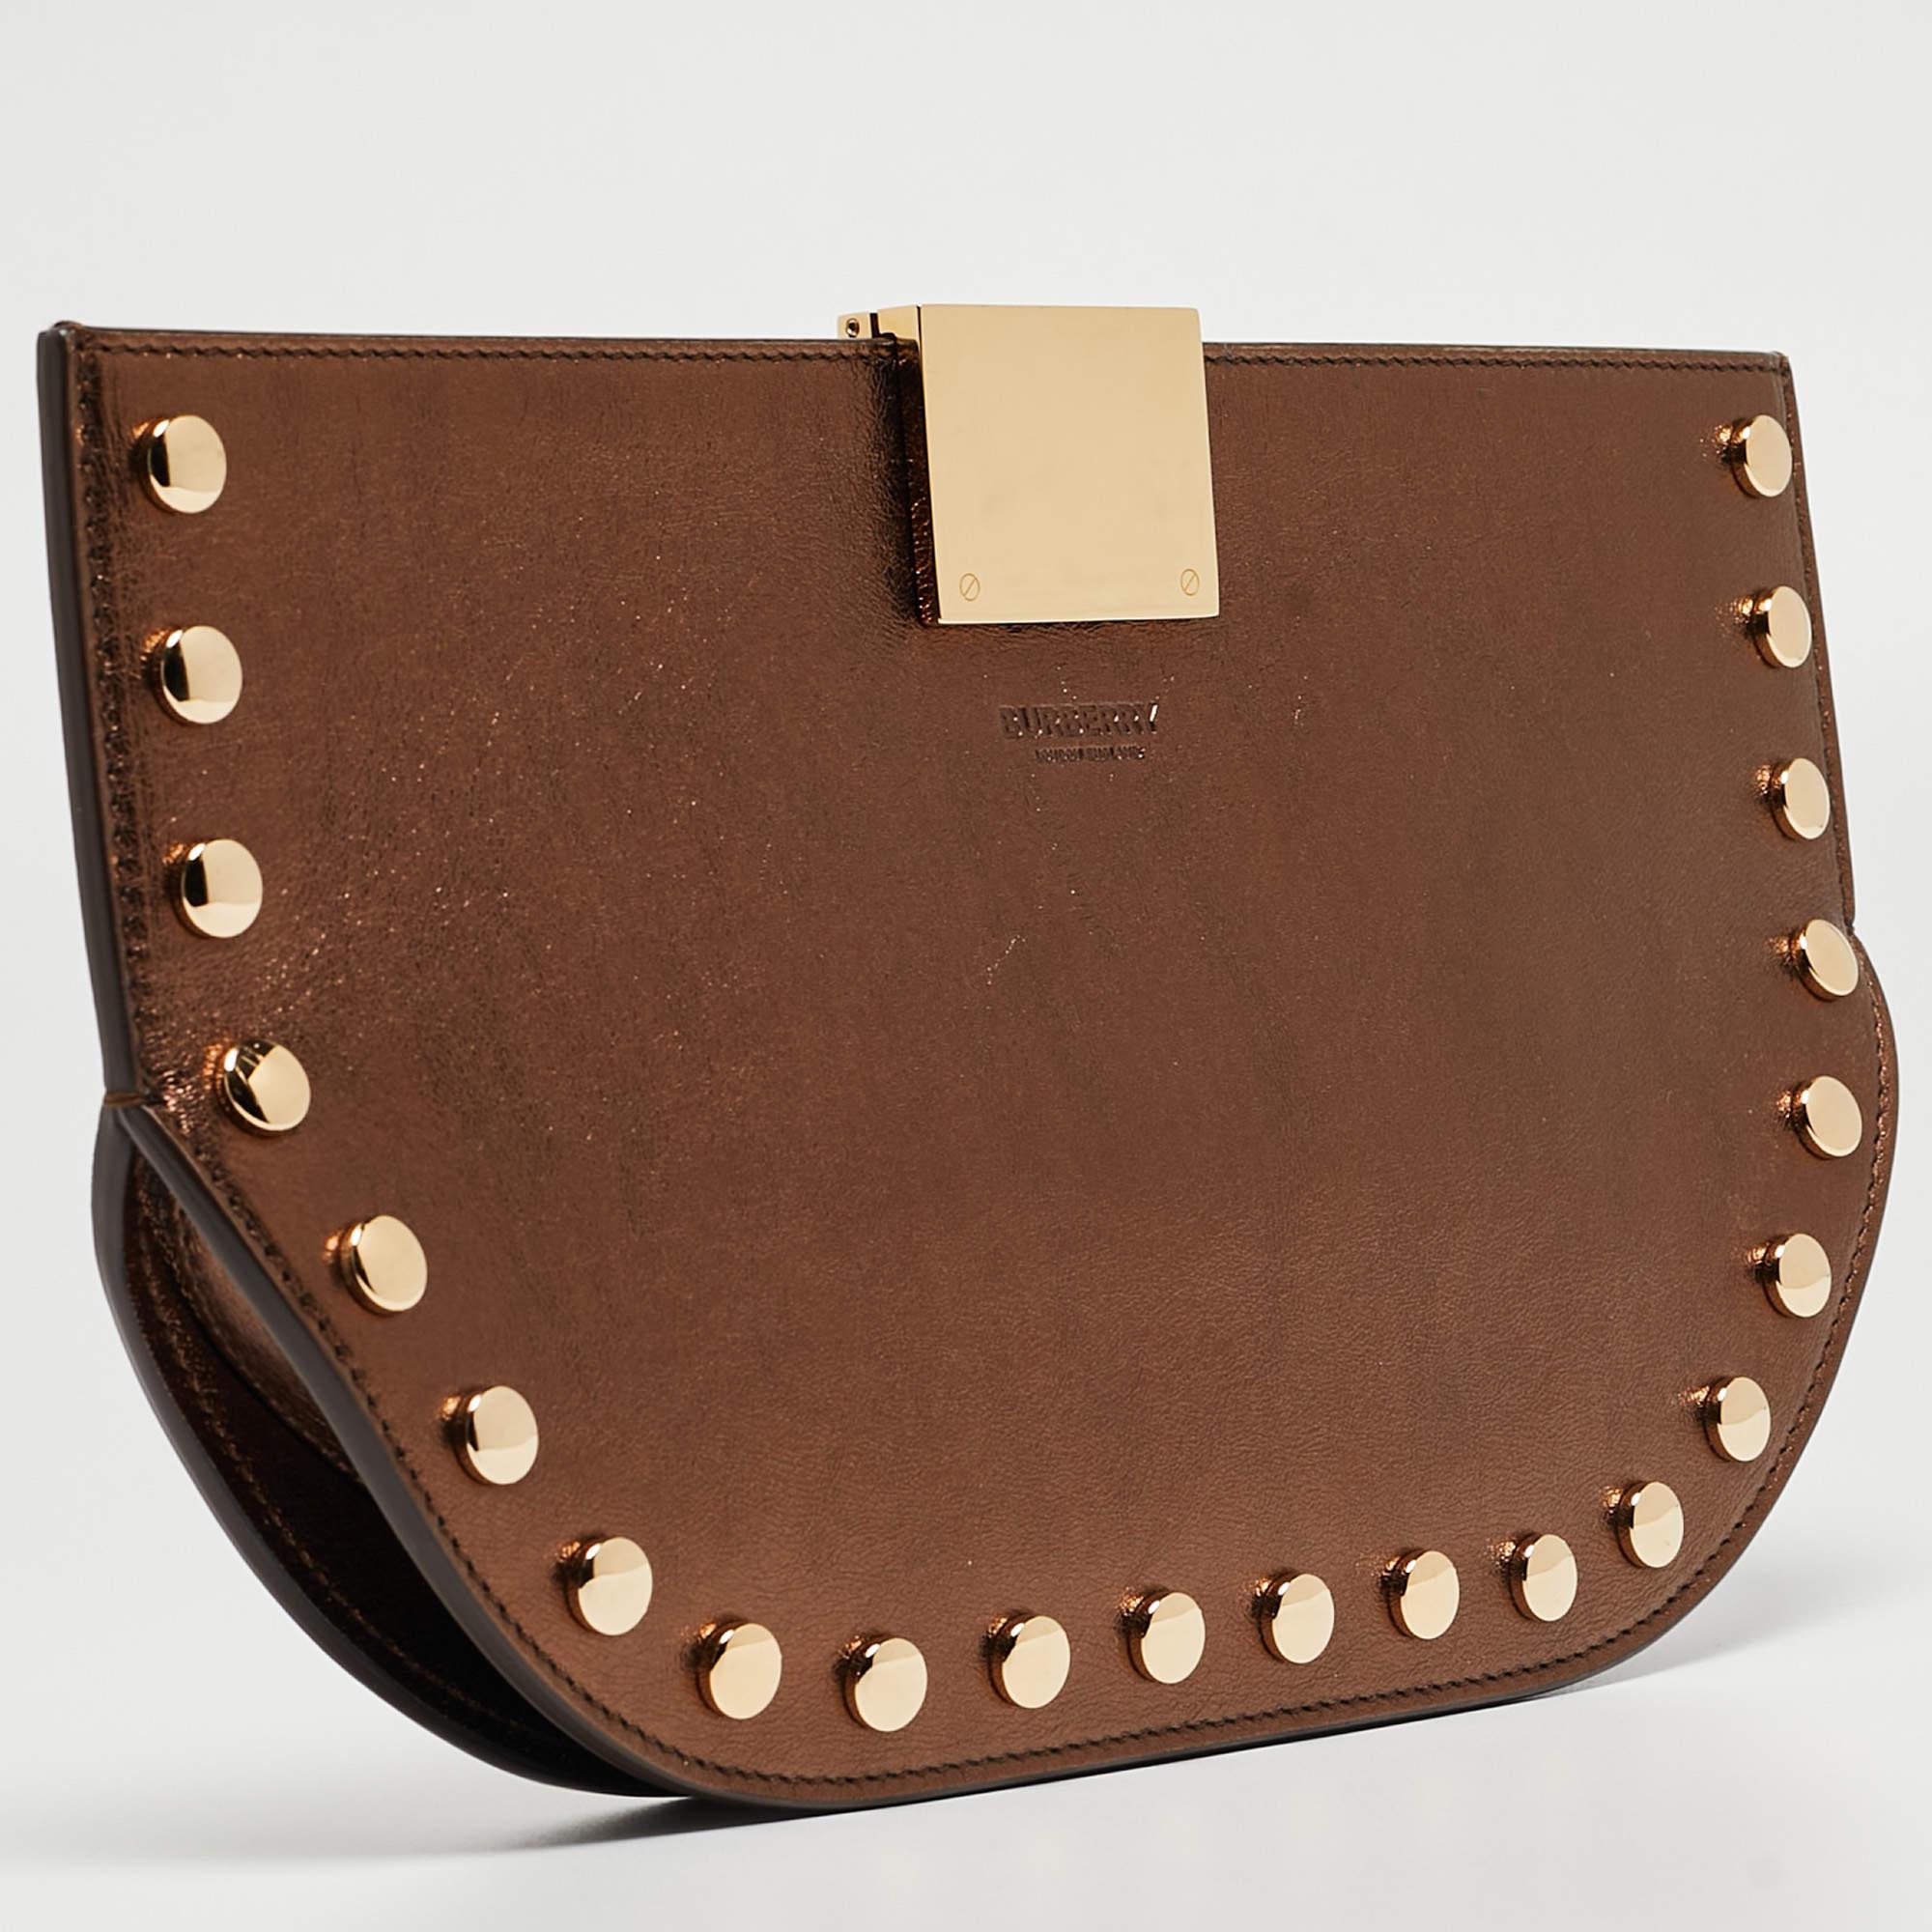 Burberry Bronze Leather Studded Olympia Clutch In Good Condition For Sale In Dubai, Al Qouz 2